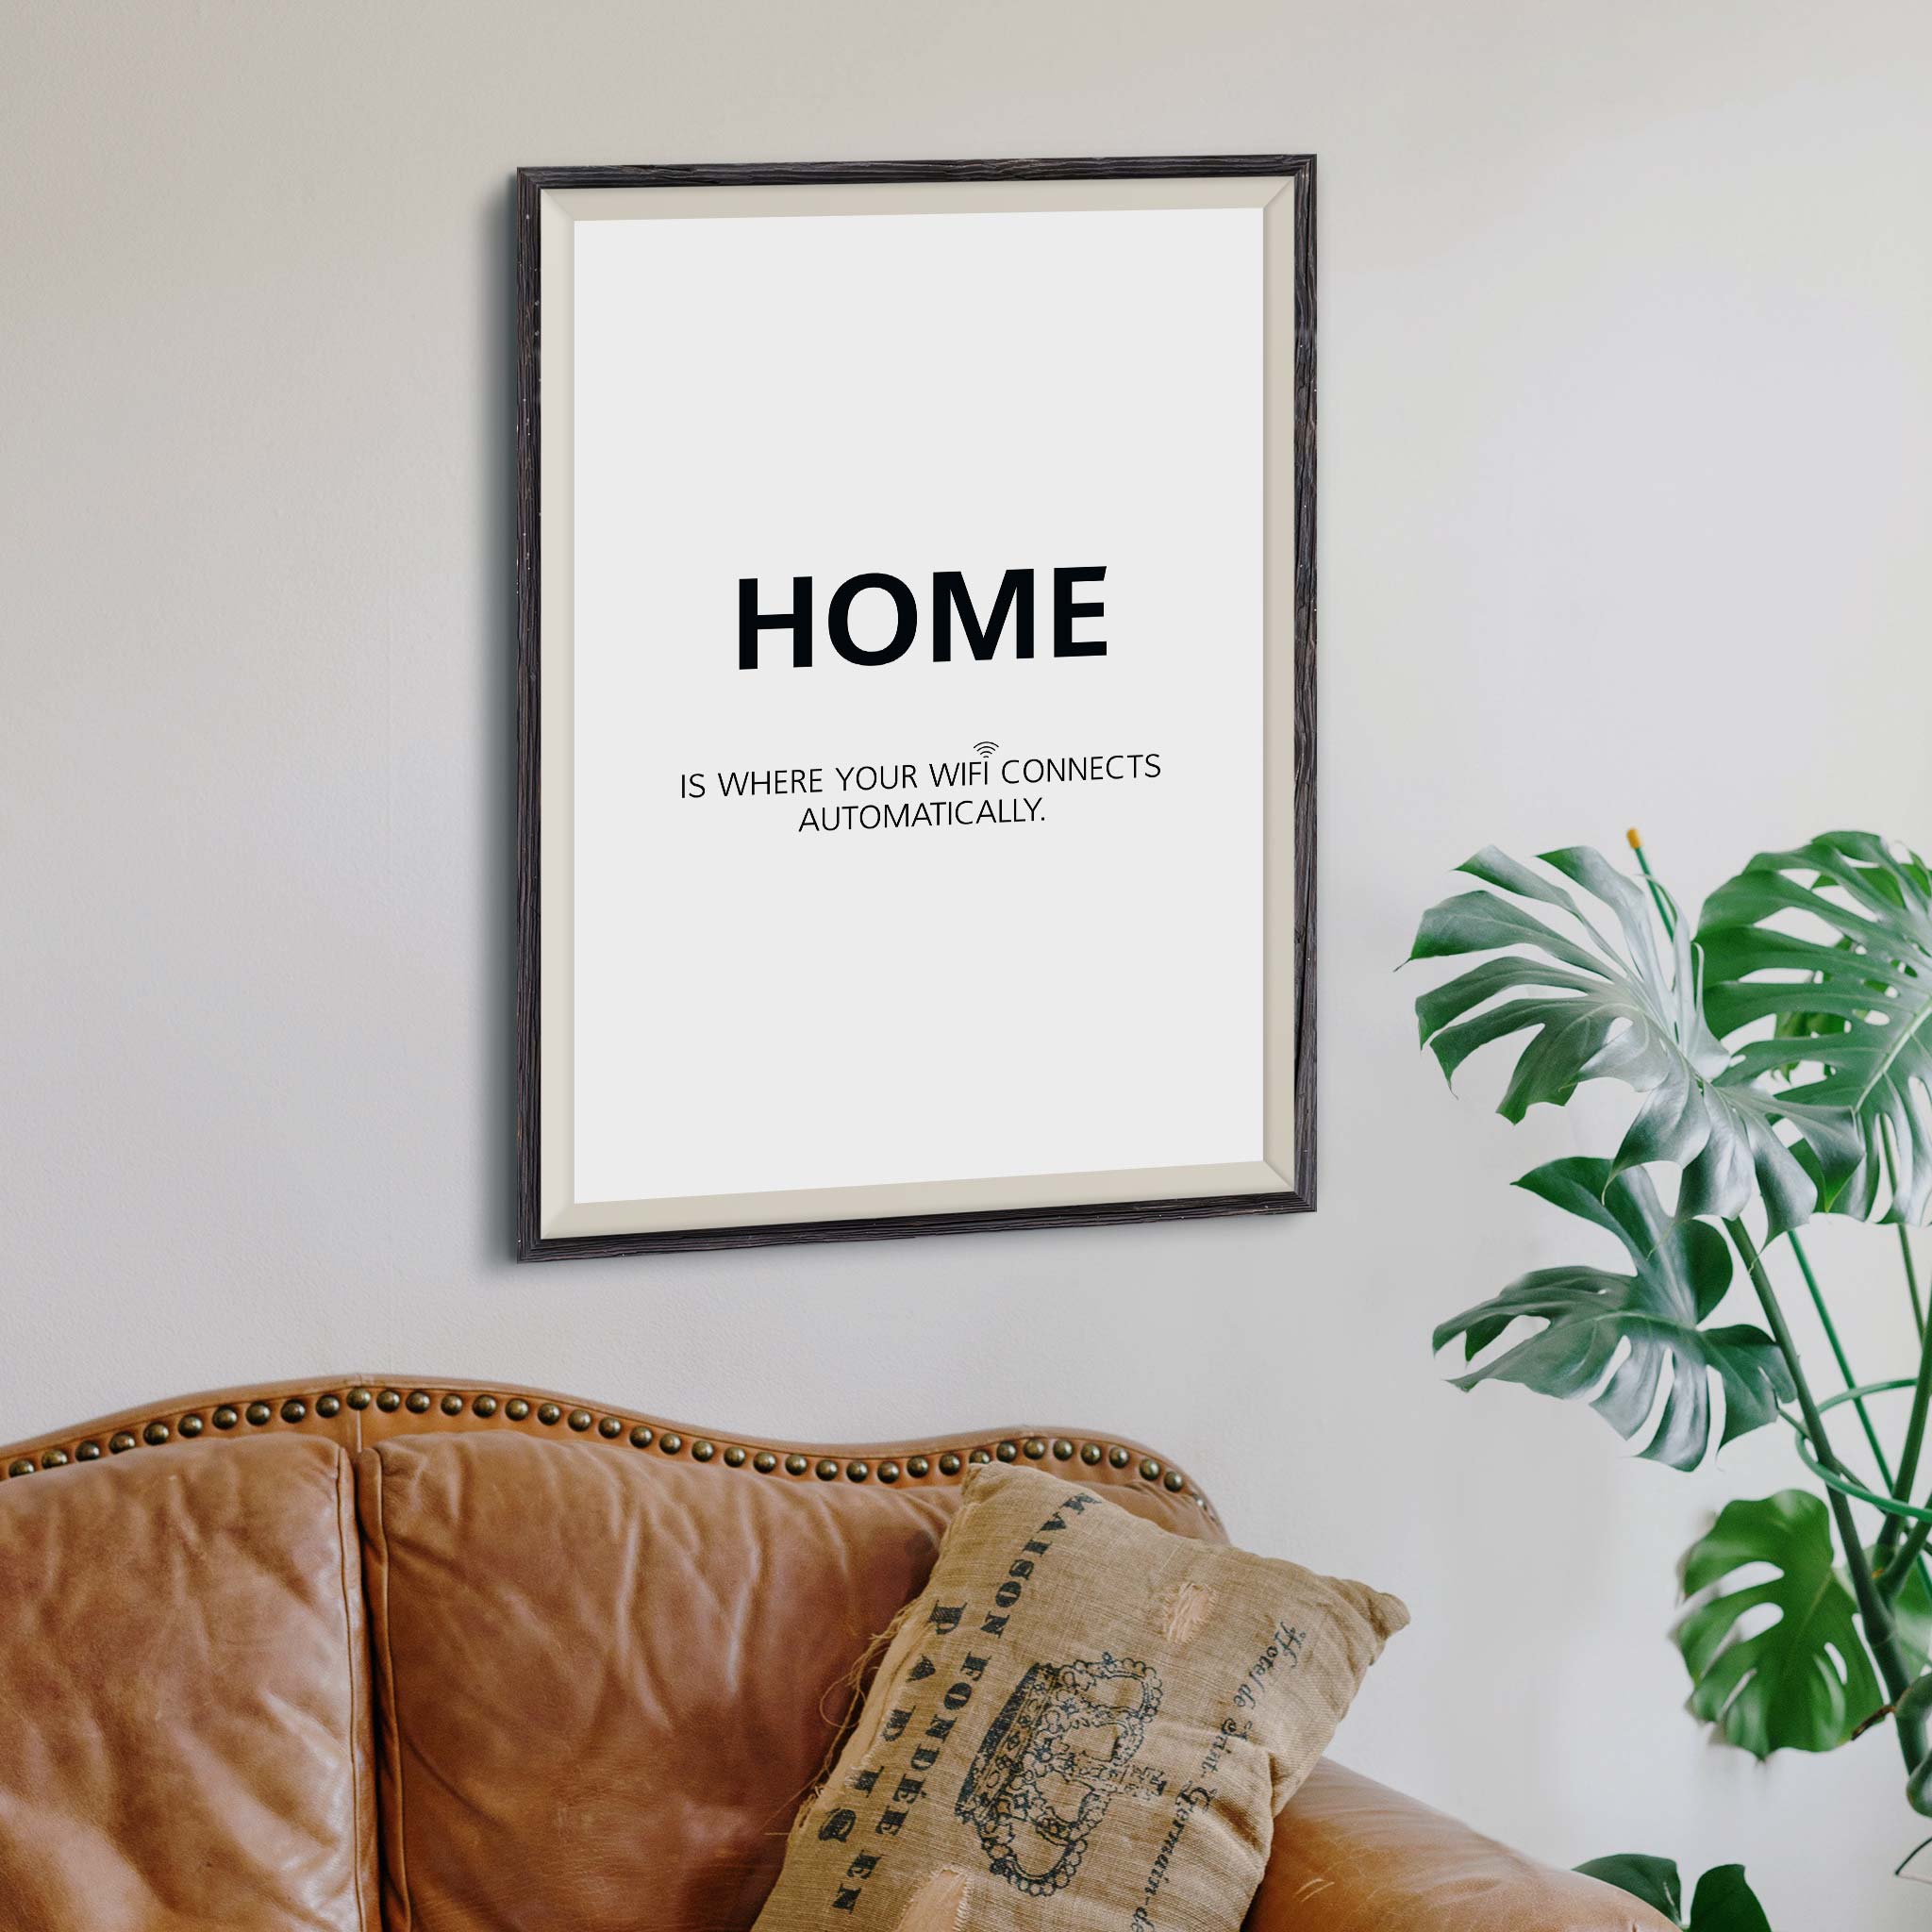 Home is where you wifi connects automatically